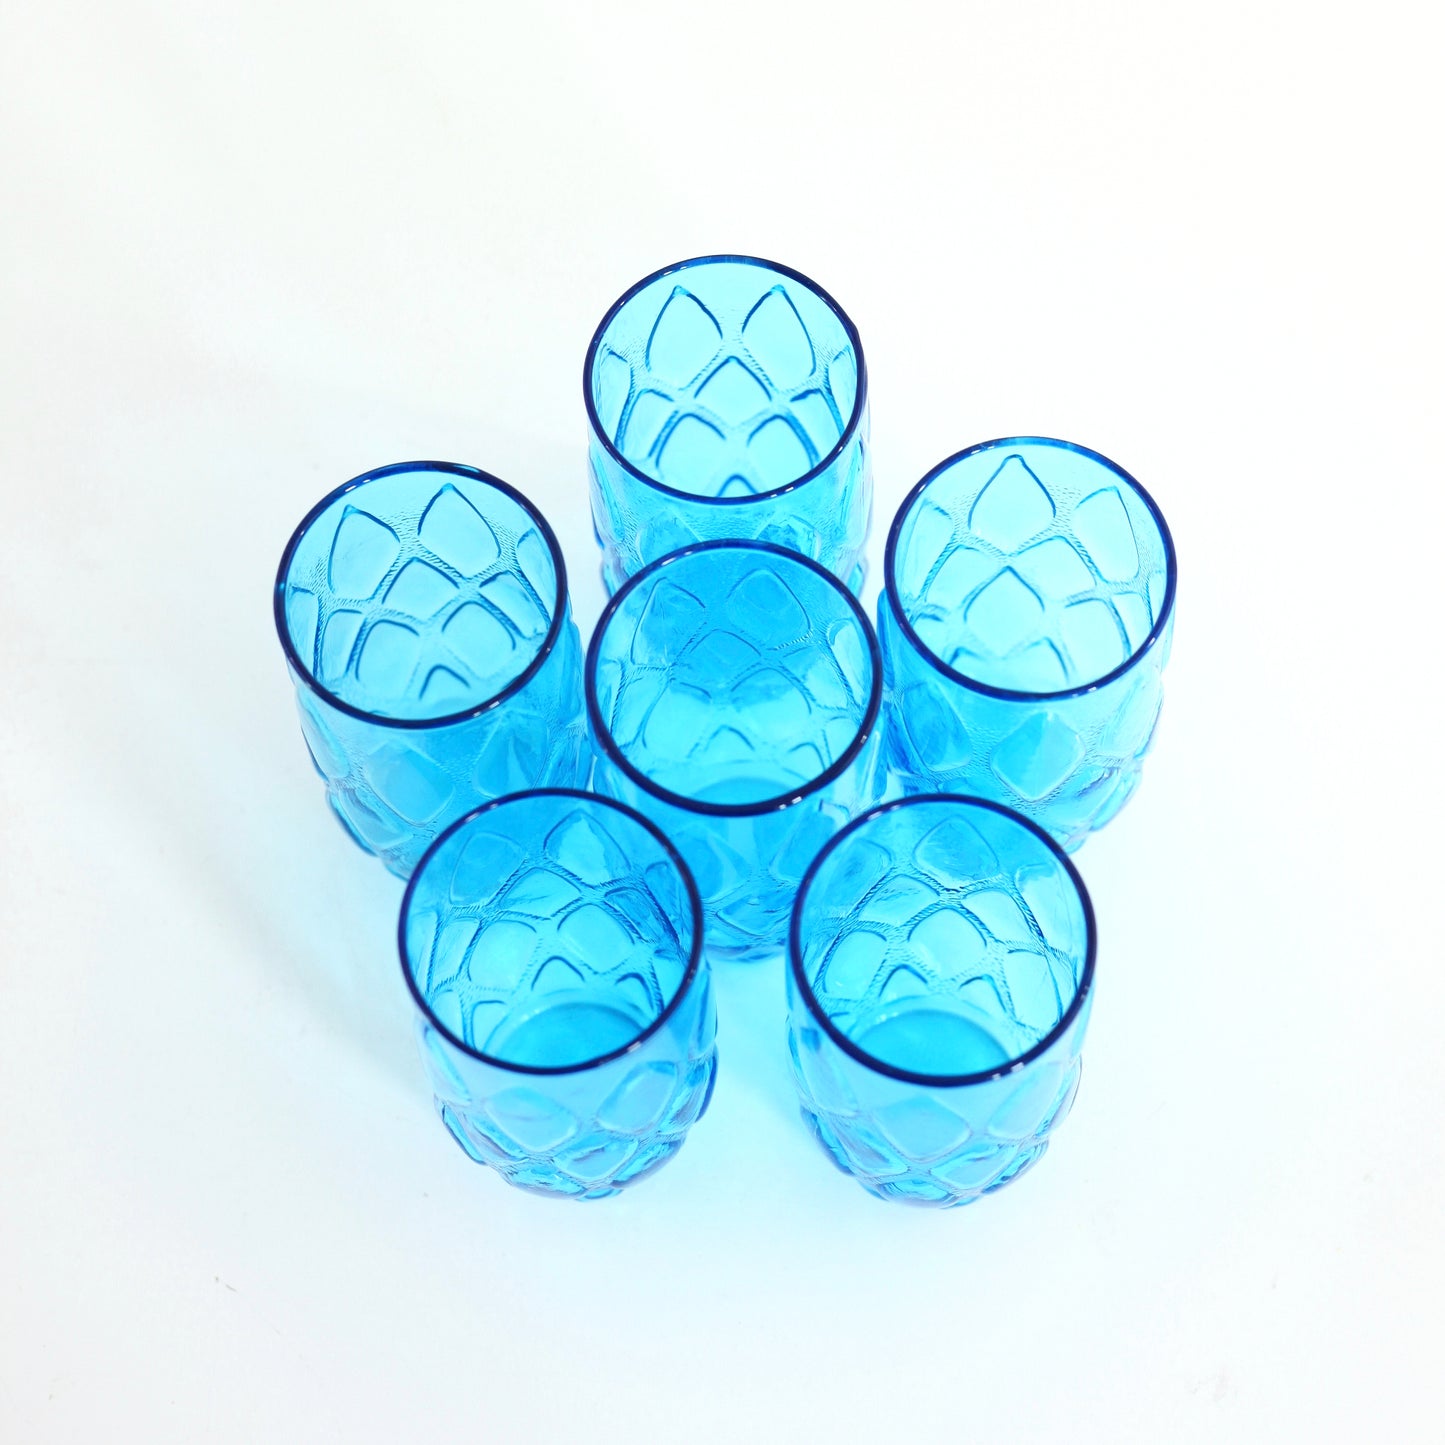 SOLD - Mid Century Turquoise Blue Madrid Glasses by Anchor Hocking